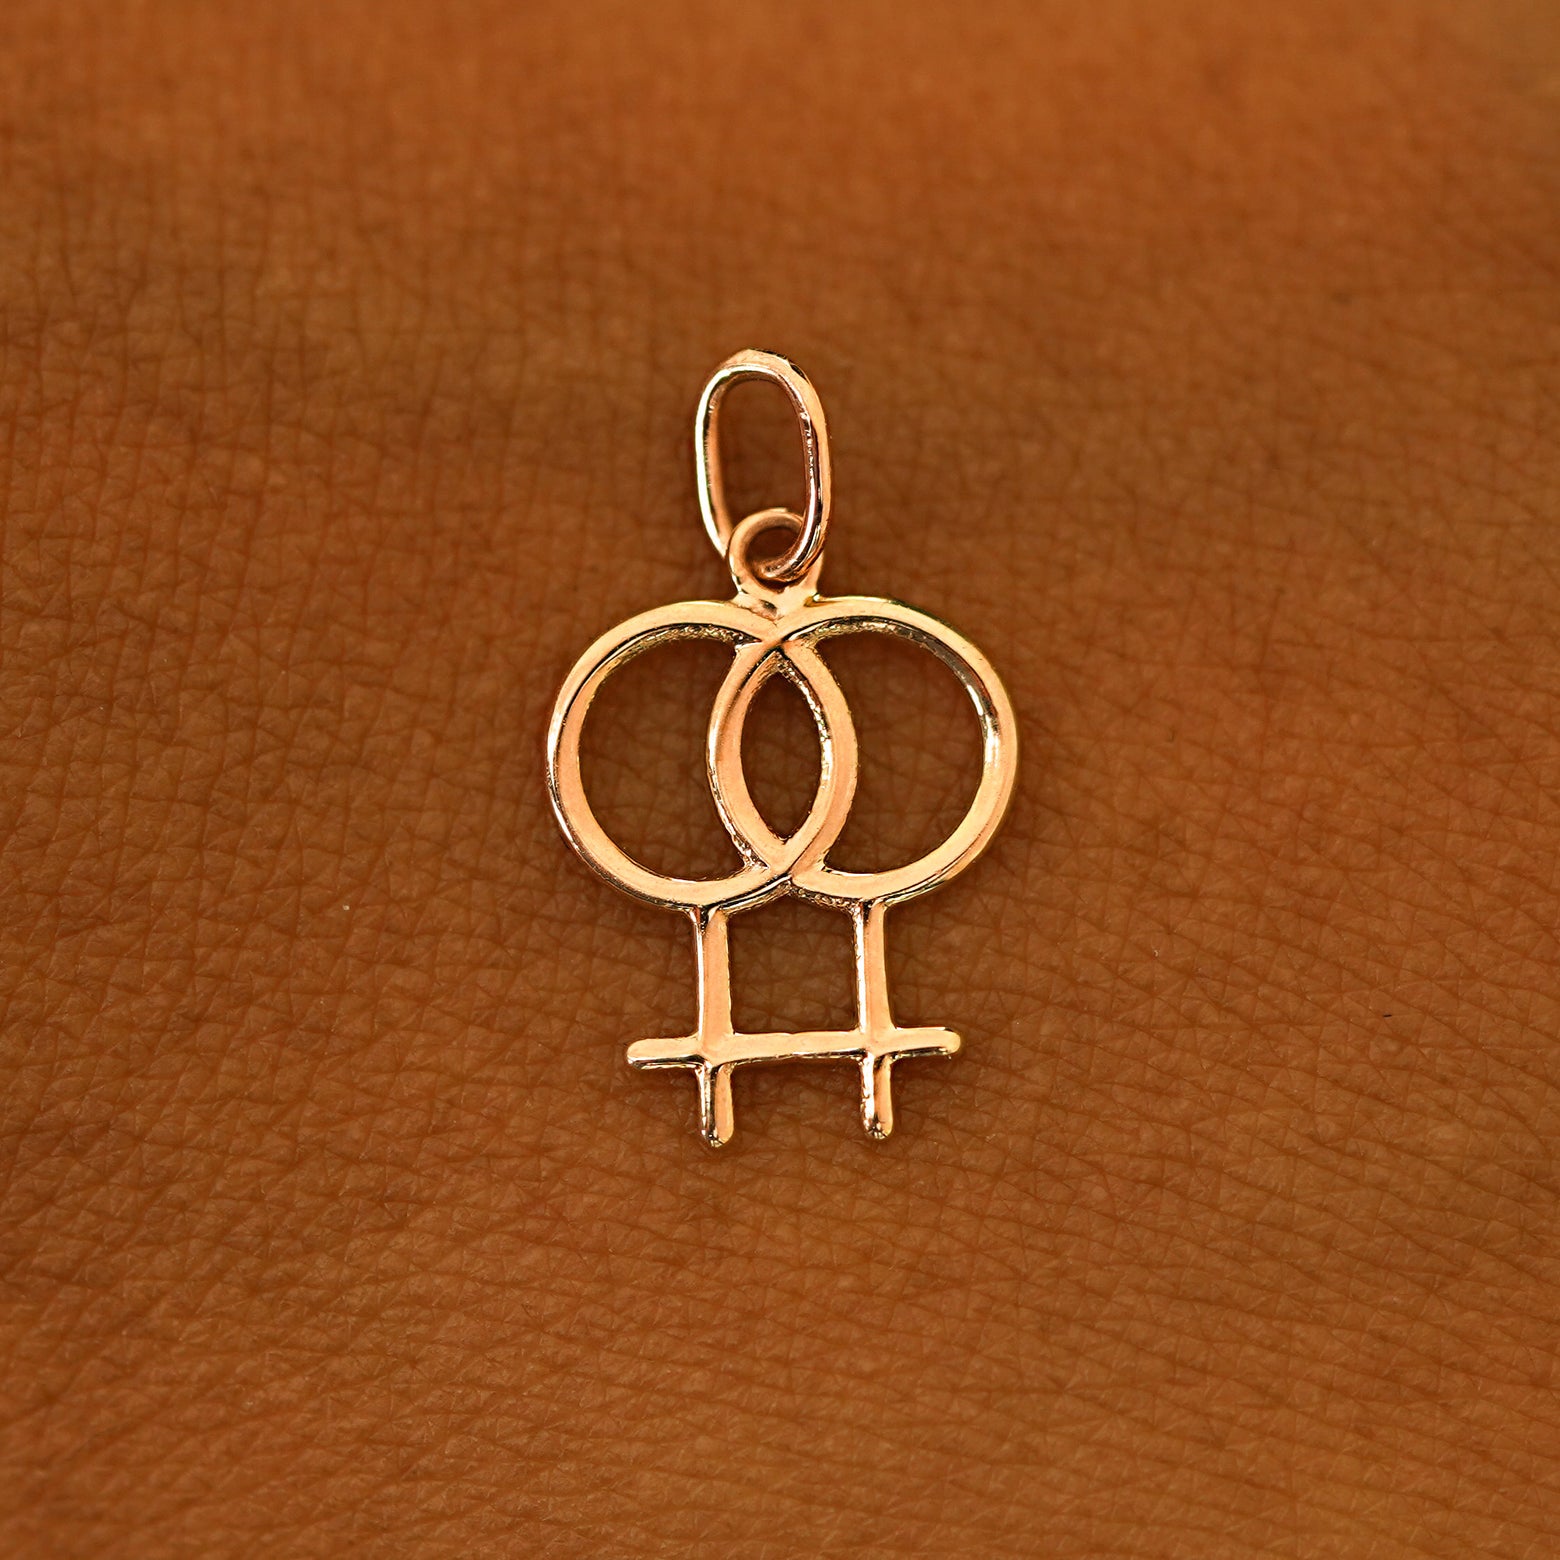 A solid 14k rose gold Lesbian Symbol Charm resting on the back of a model's hand